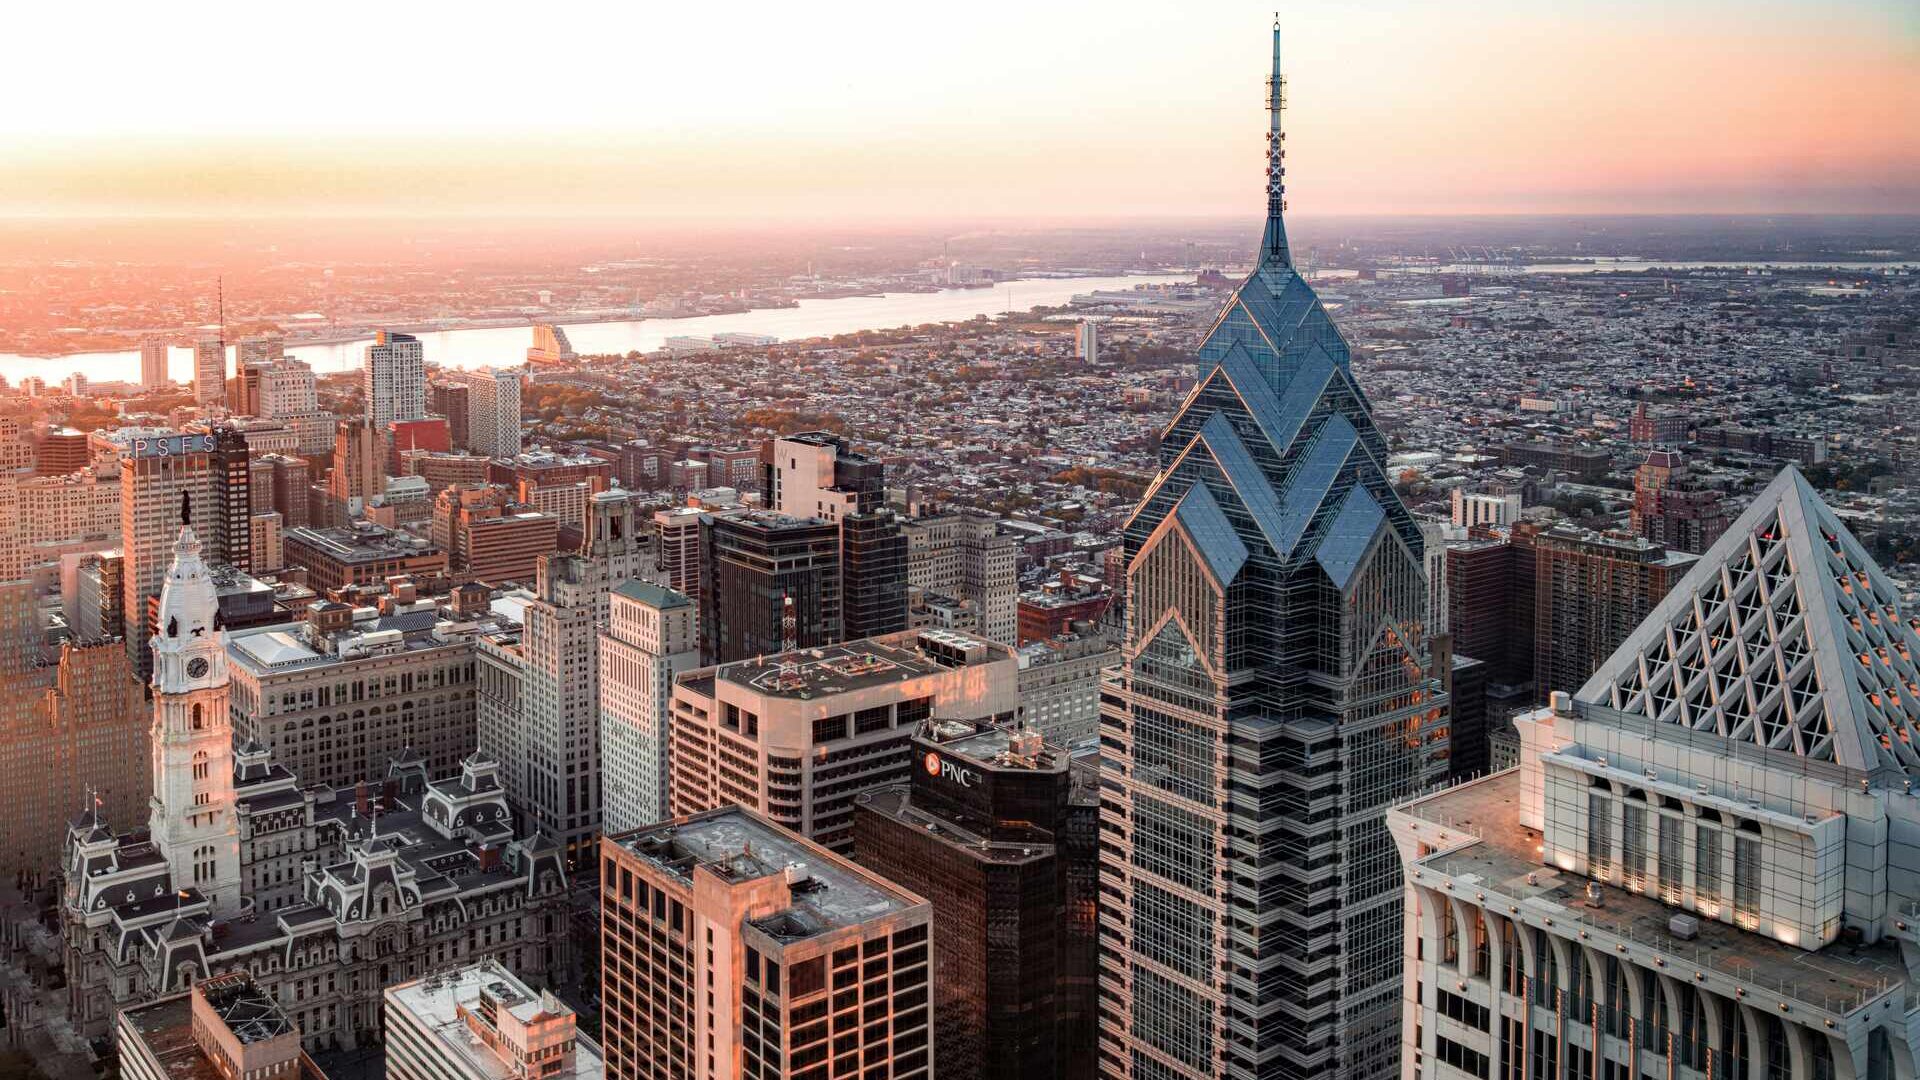 Aerial view of Philadelphia, showcasing the cityscape under a vast sky. Skyscrapers, historic landmarks, and urban architecture blend together in this dynamic skyline, capturing the essence of Philadelphia from a bird's-eye perspective.